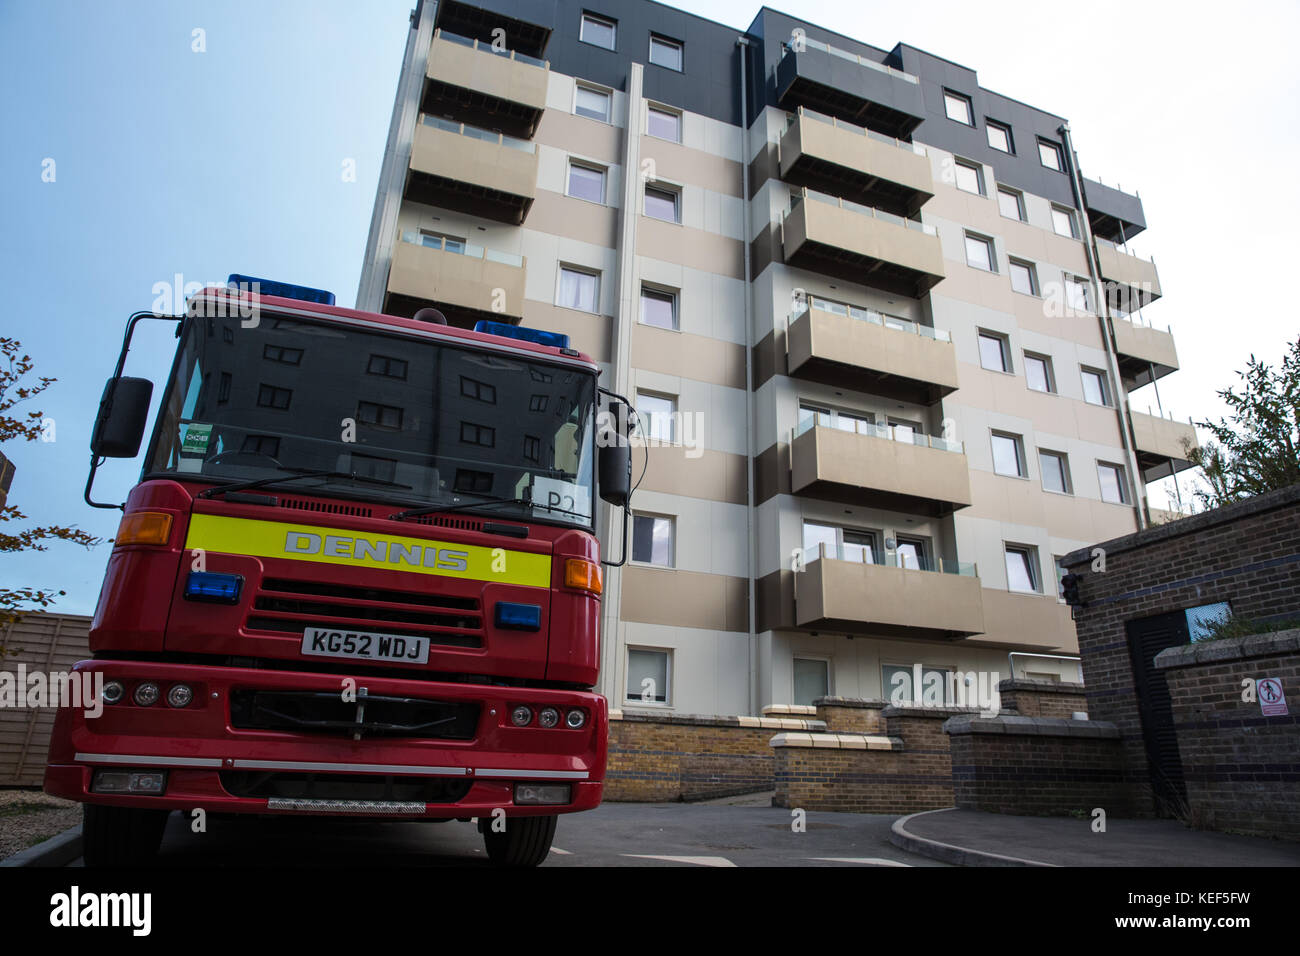 Slough, UK. 20th Oct, 2017. A fire engine and crew are keeping a 24-hour watch on privately-owned Nova House at an estimated cost to the taxpayer of £2,000 per day after post-Grenfell fire brigade and council investigations revealed unsafe cladding and multiple fire safety faults. Credit: Mark Kerrison/Alamy Live News Stock Photo